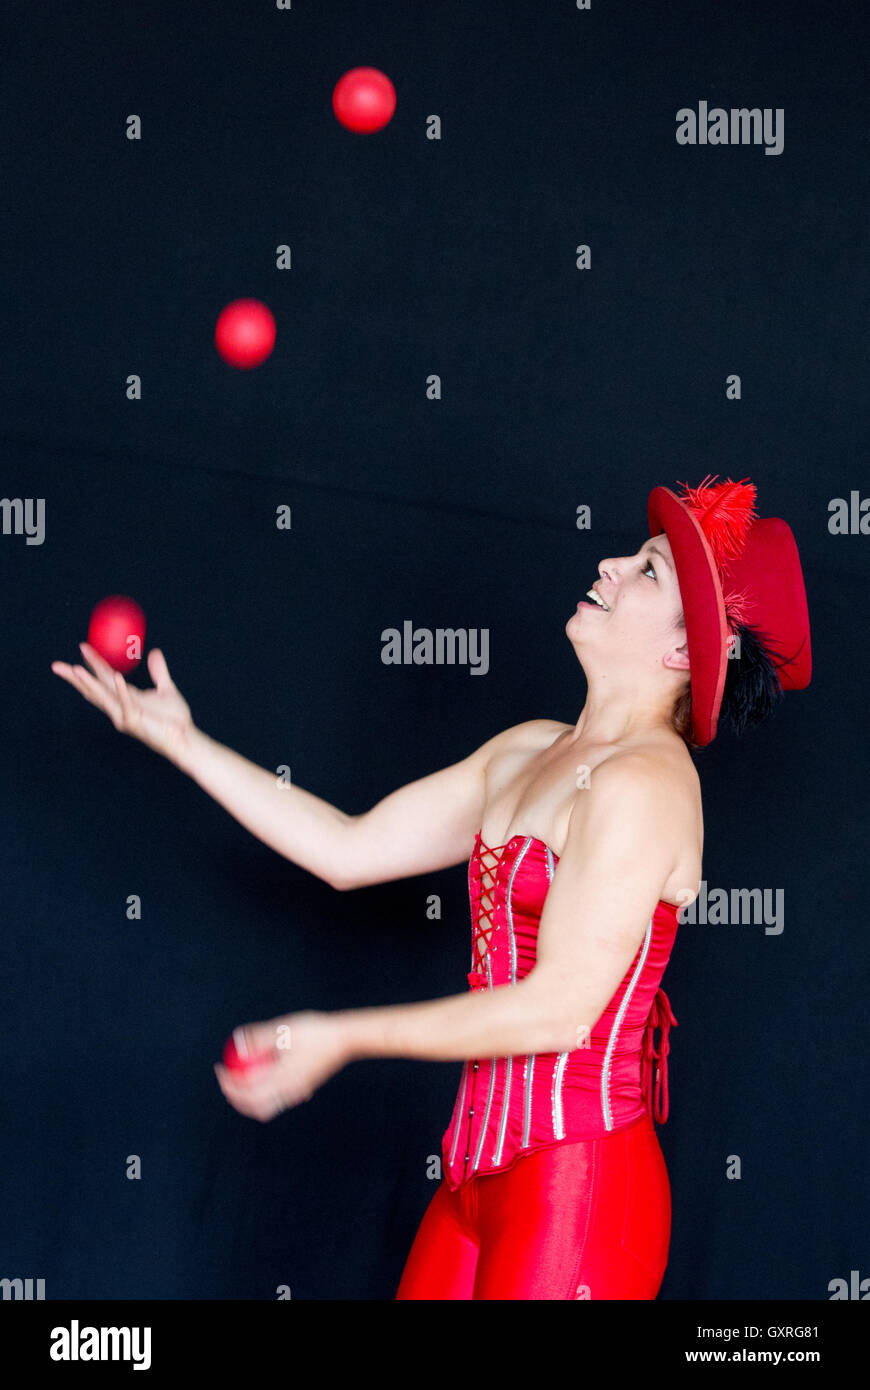 Smiling female juggler wearing a red top hat and red basque with three balls in the air and one in the hand Stock Photo